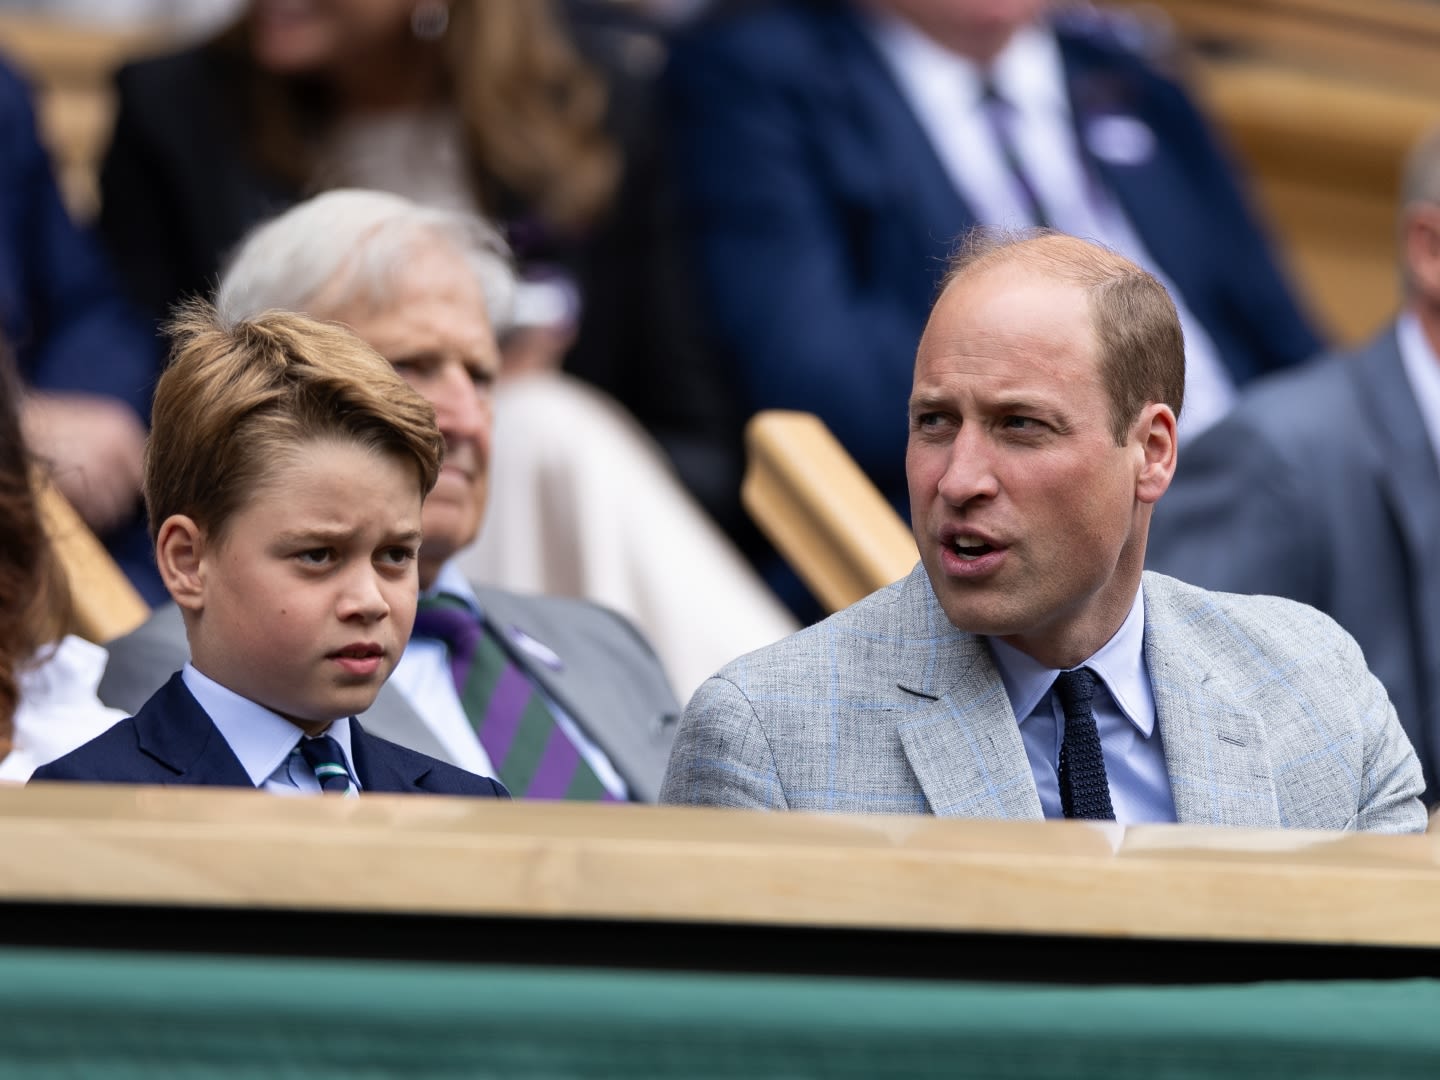 Prince George May Be Ready to Take on This Hobby His Dad Prince William Got a Lot of Heat For